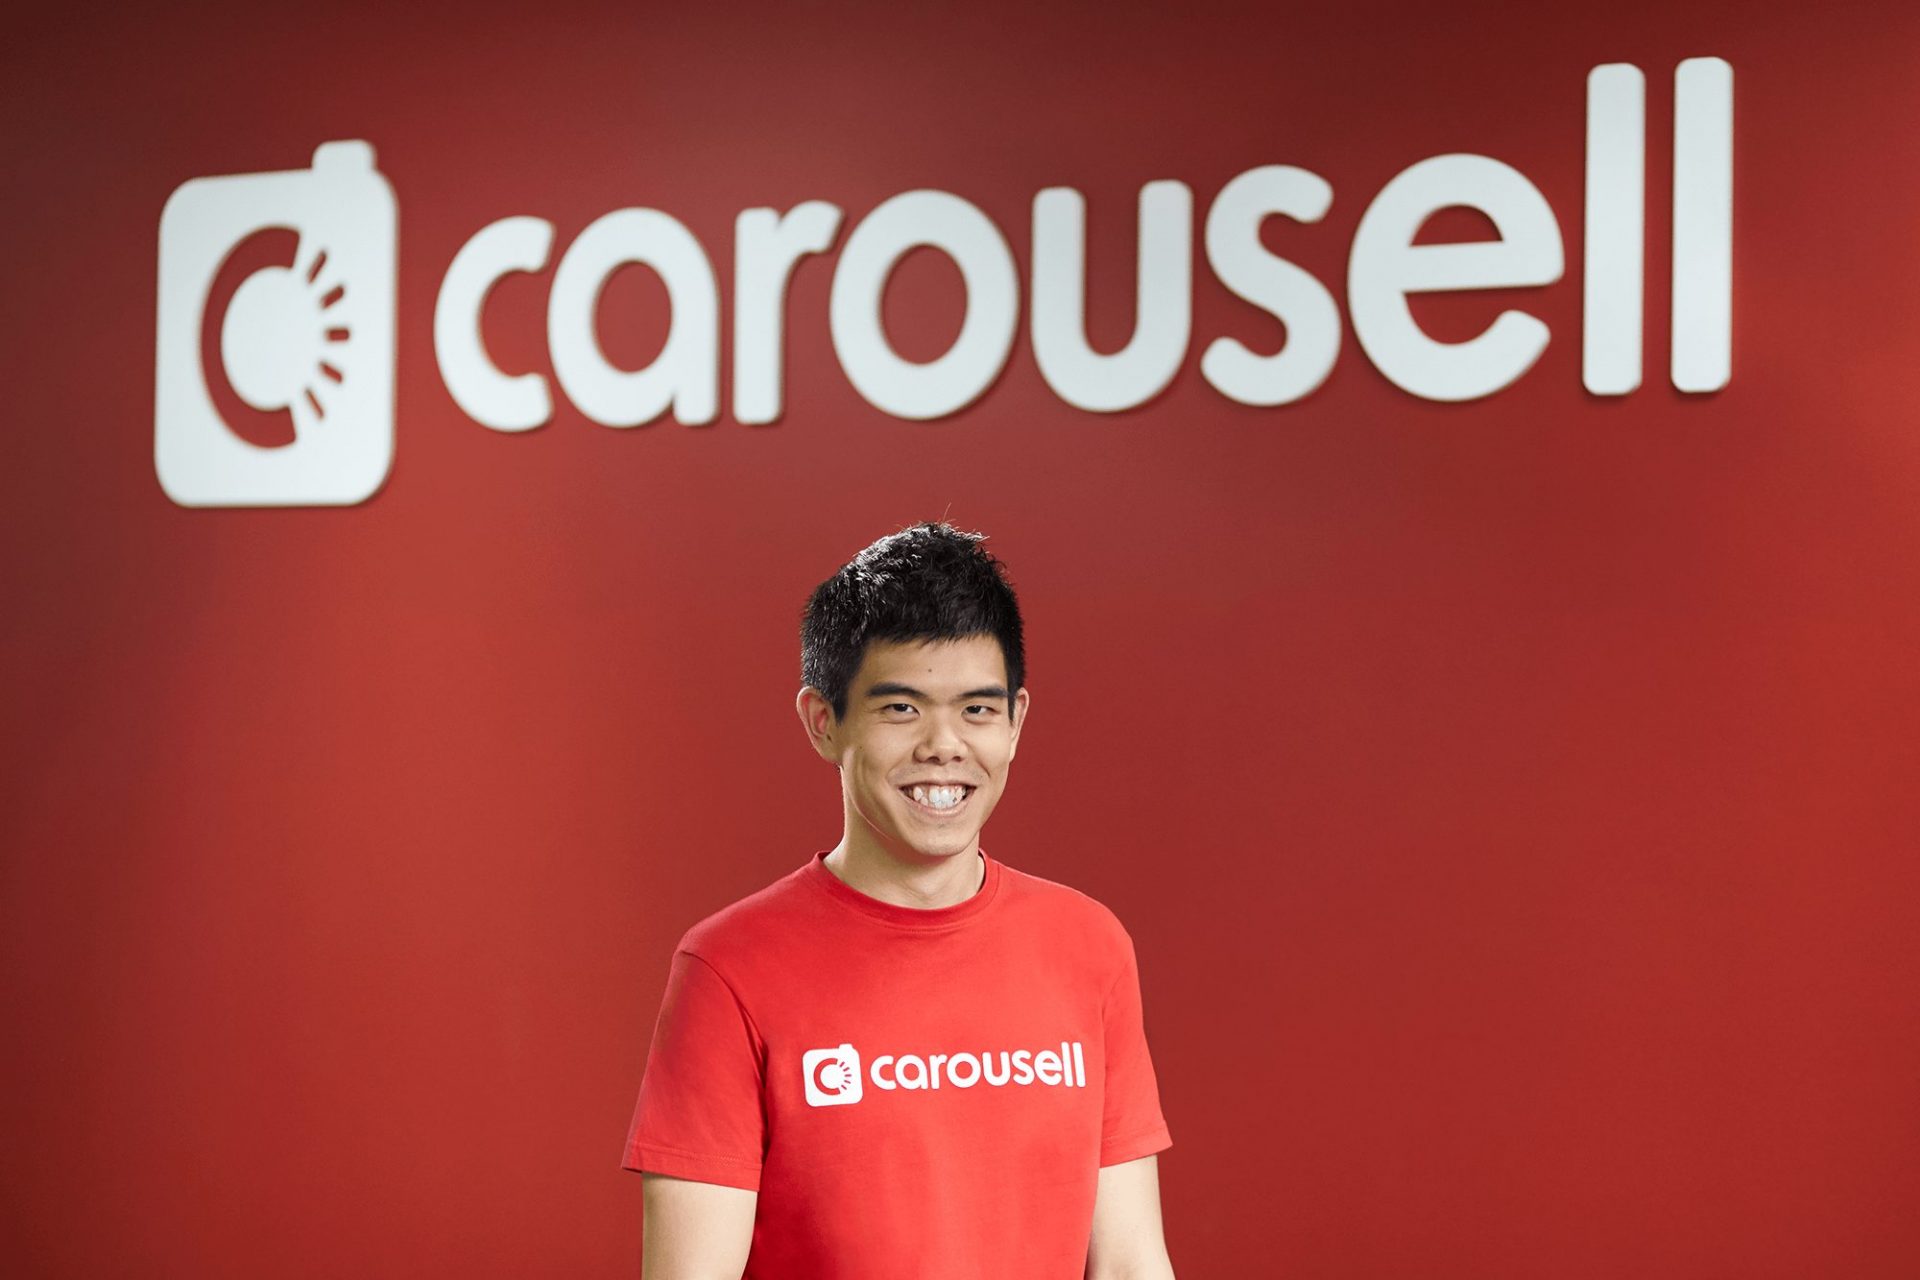 Daily Markup #363: Carousell on CNN about reaching one million listings in its first year; Naluri is building SEA’s largest mental health dataset; UrbanMetry on the romanticization of homeownership in Malaysia